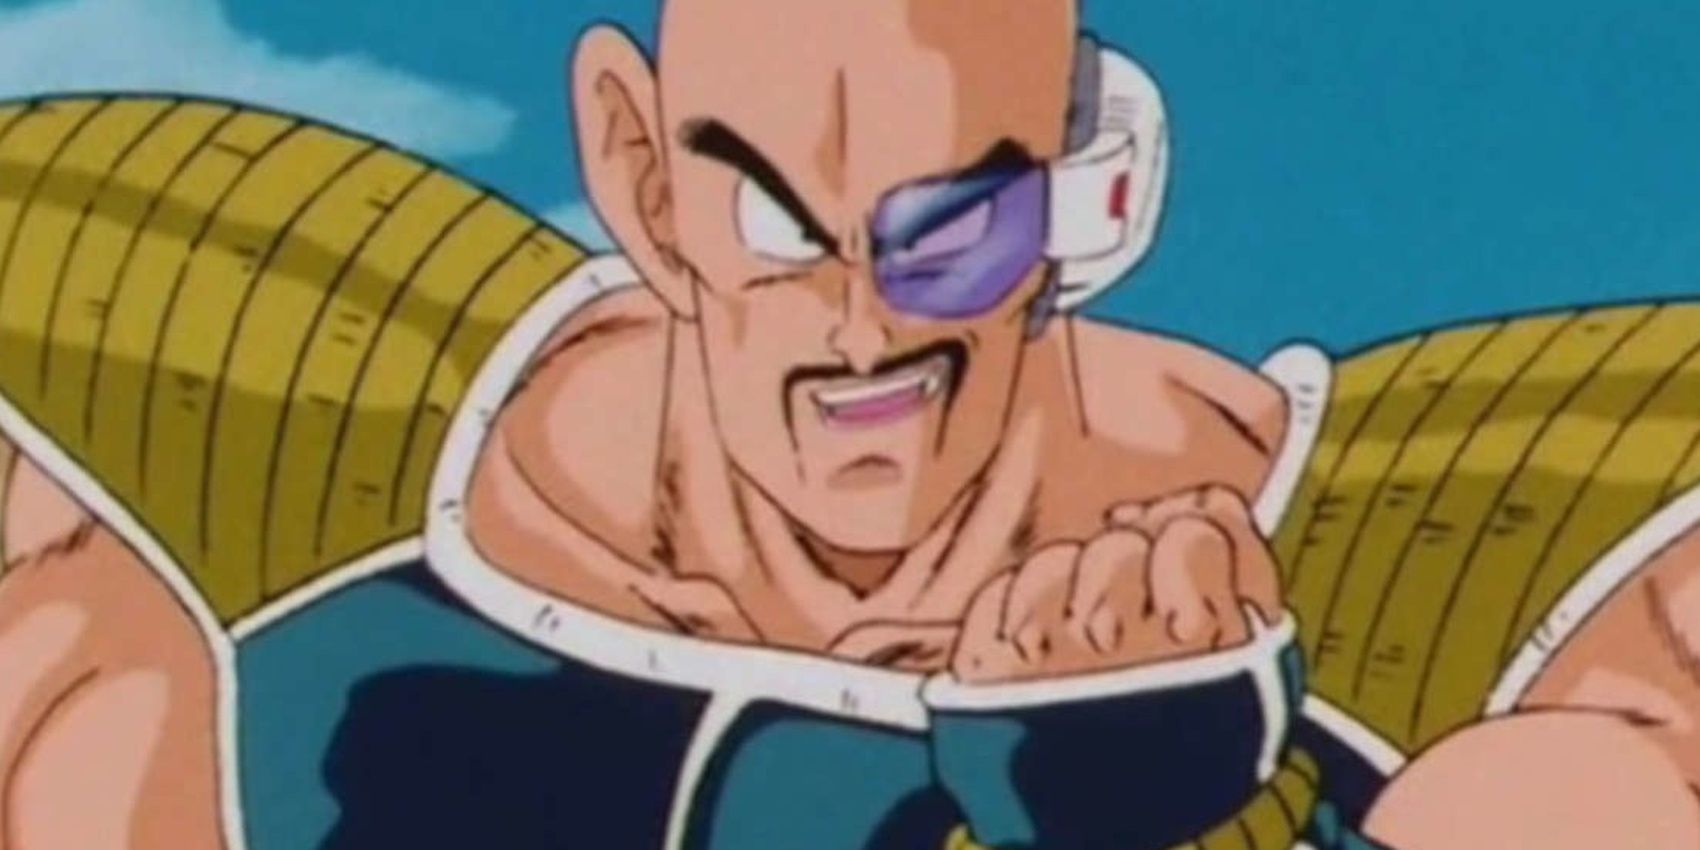 Nappa tries to intimidate his opponents in Dragon Ball Z